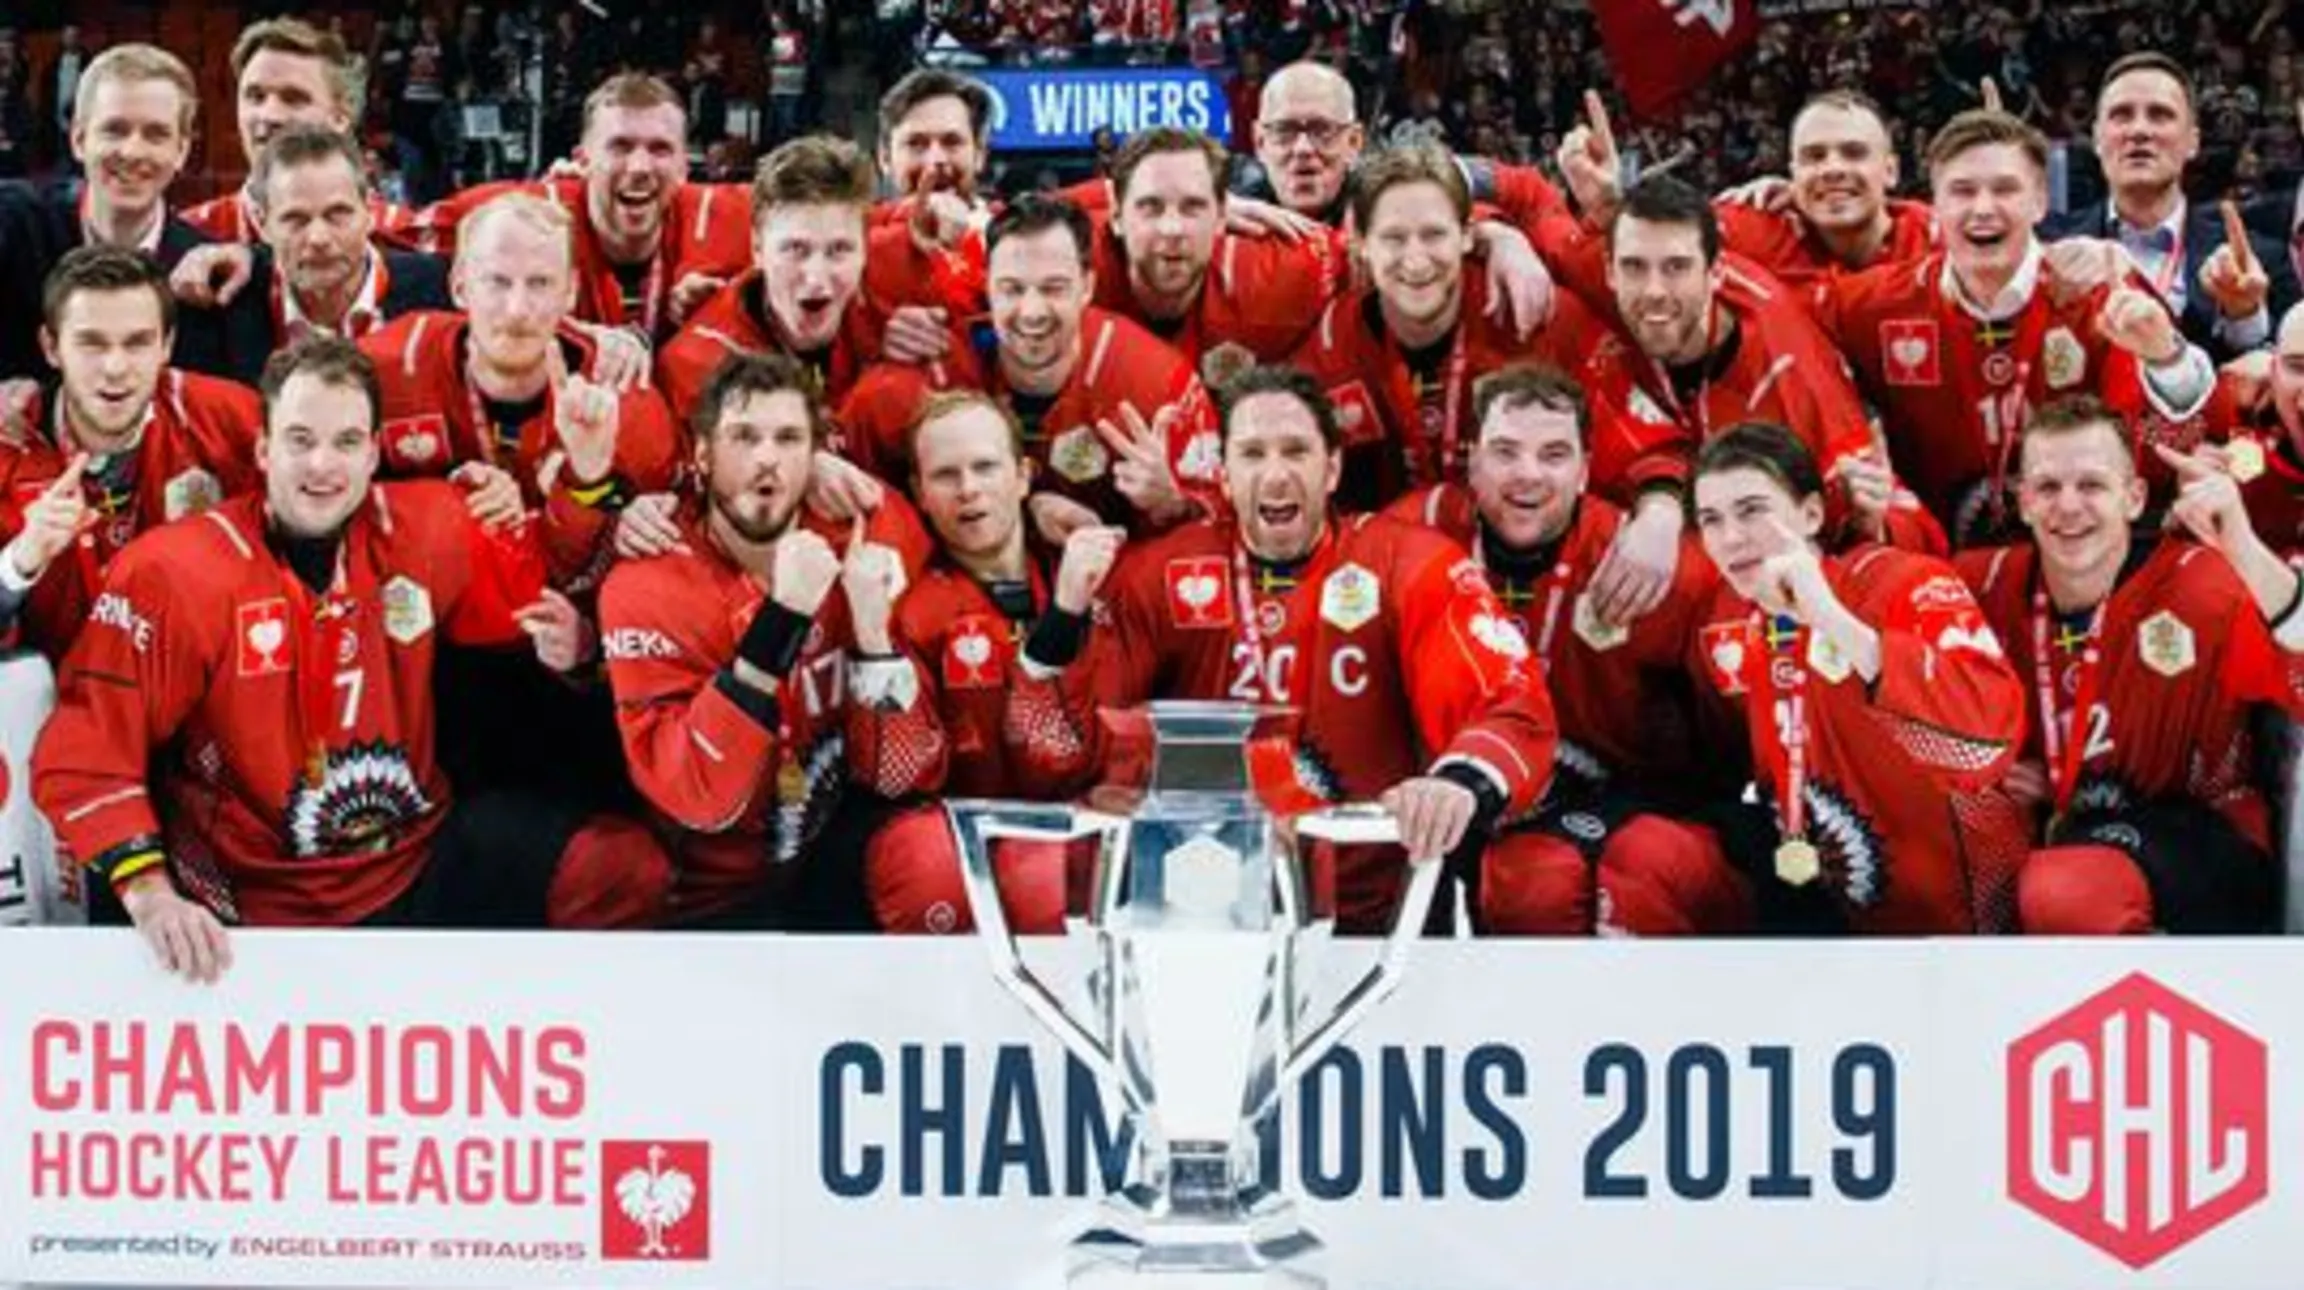 Best of the NL The Top Swiss Teams in CHL History